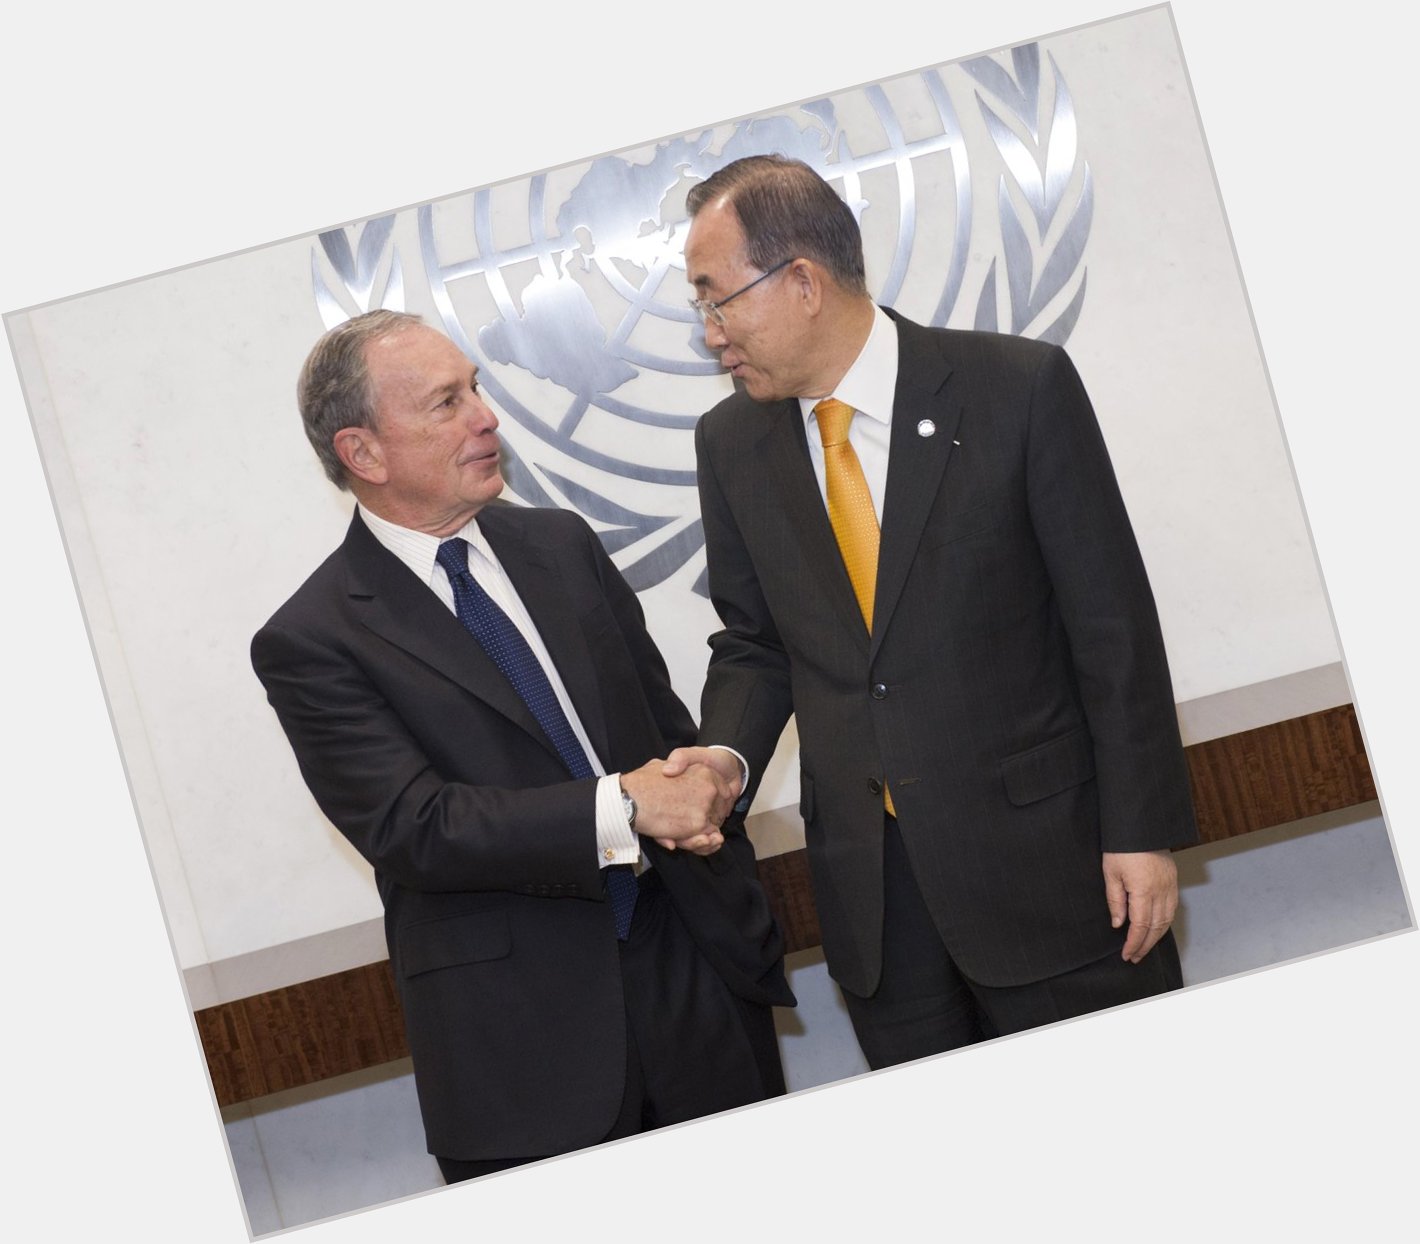 A very happy birthday to Secretary-General Ban Ki-moon. It\s an honor to work with you to fight 